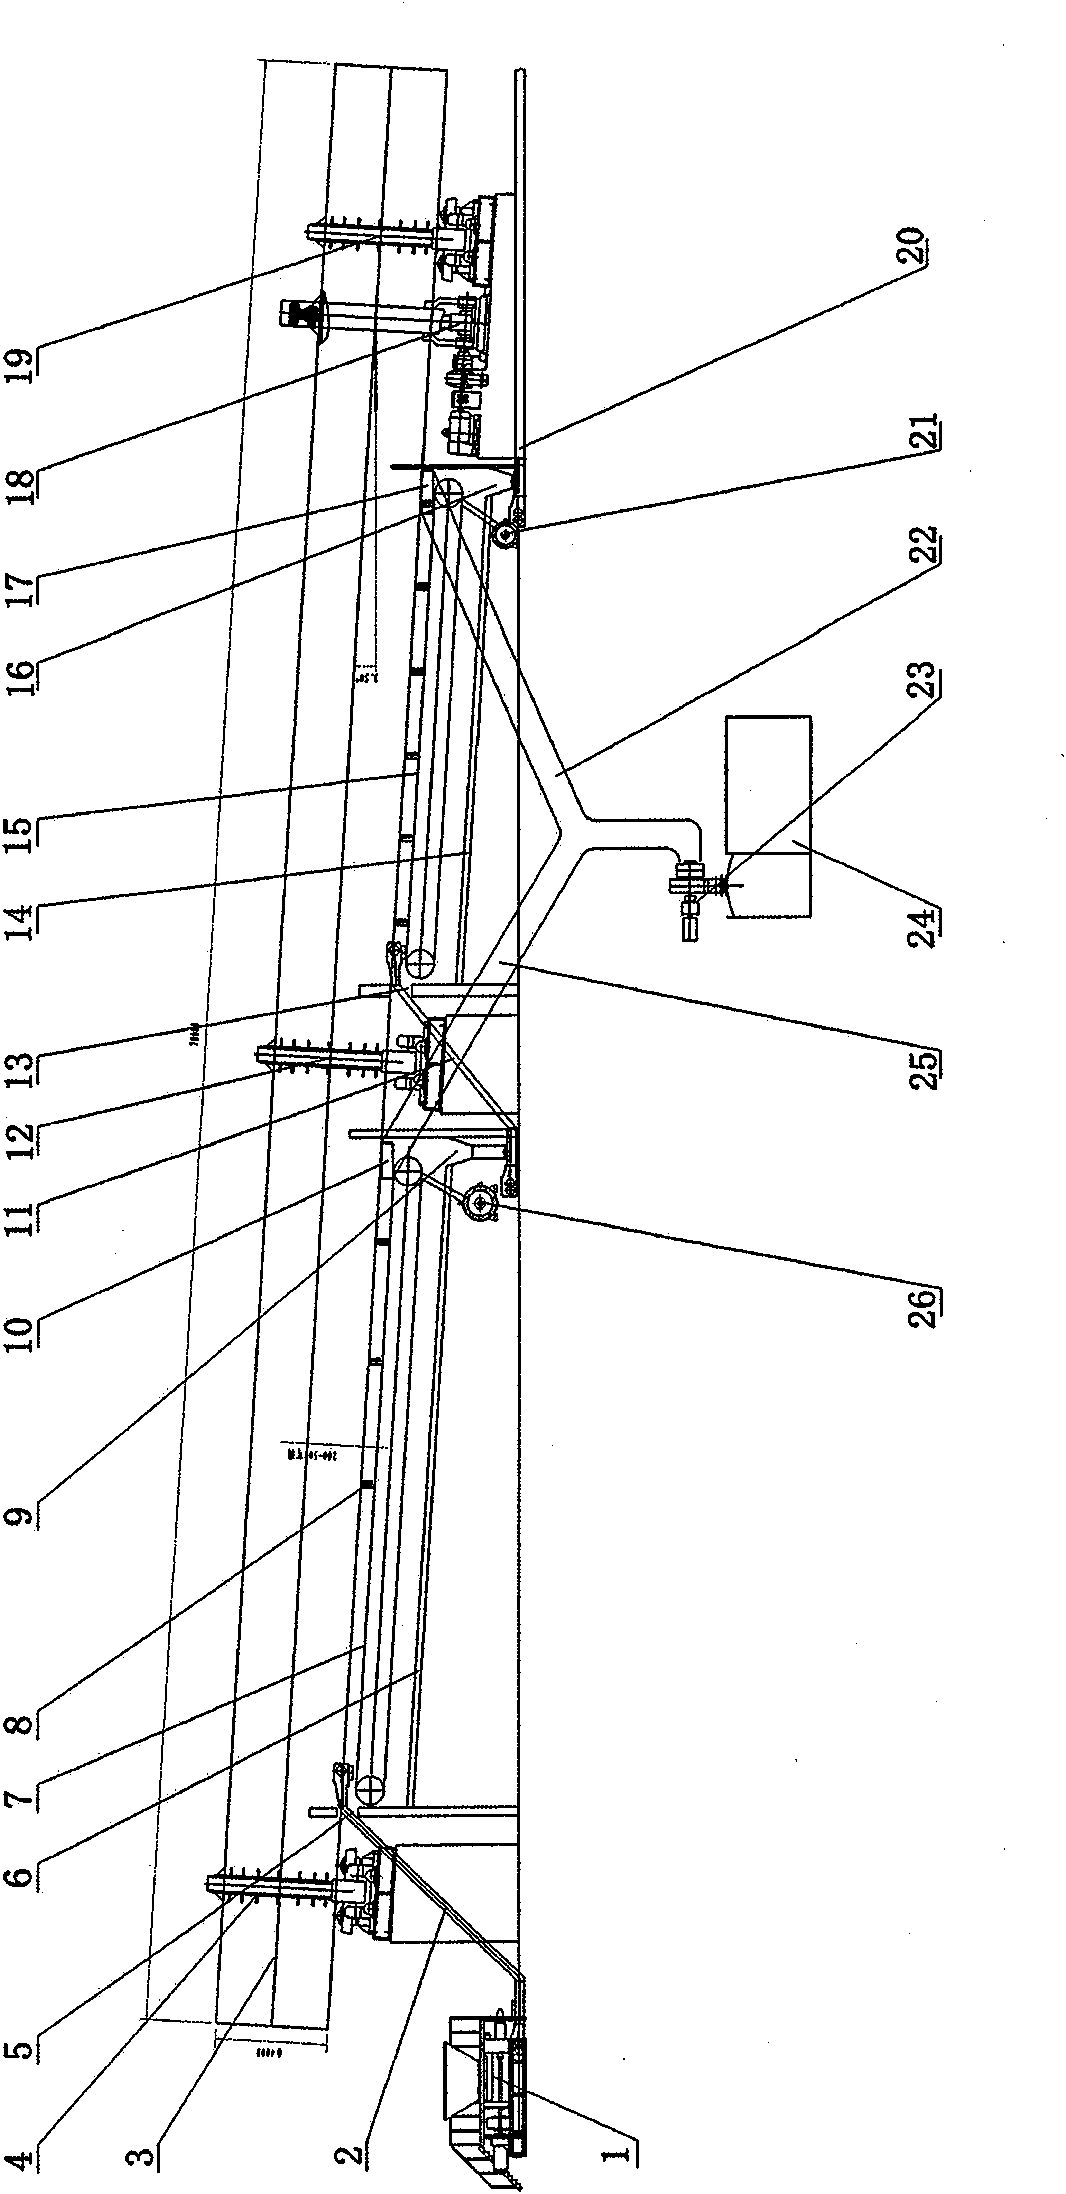 System for drying sludge by utilizing radiation heat of rotary cement kiln